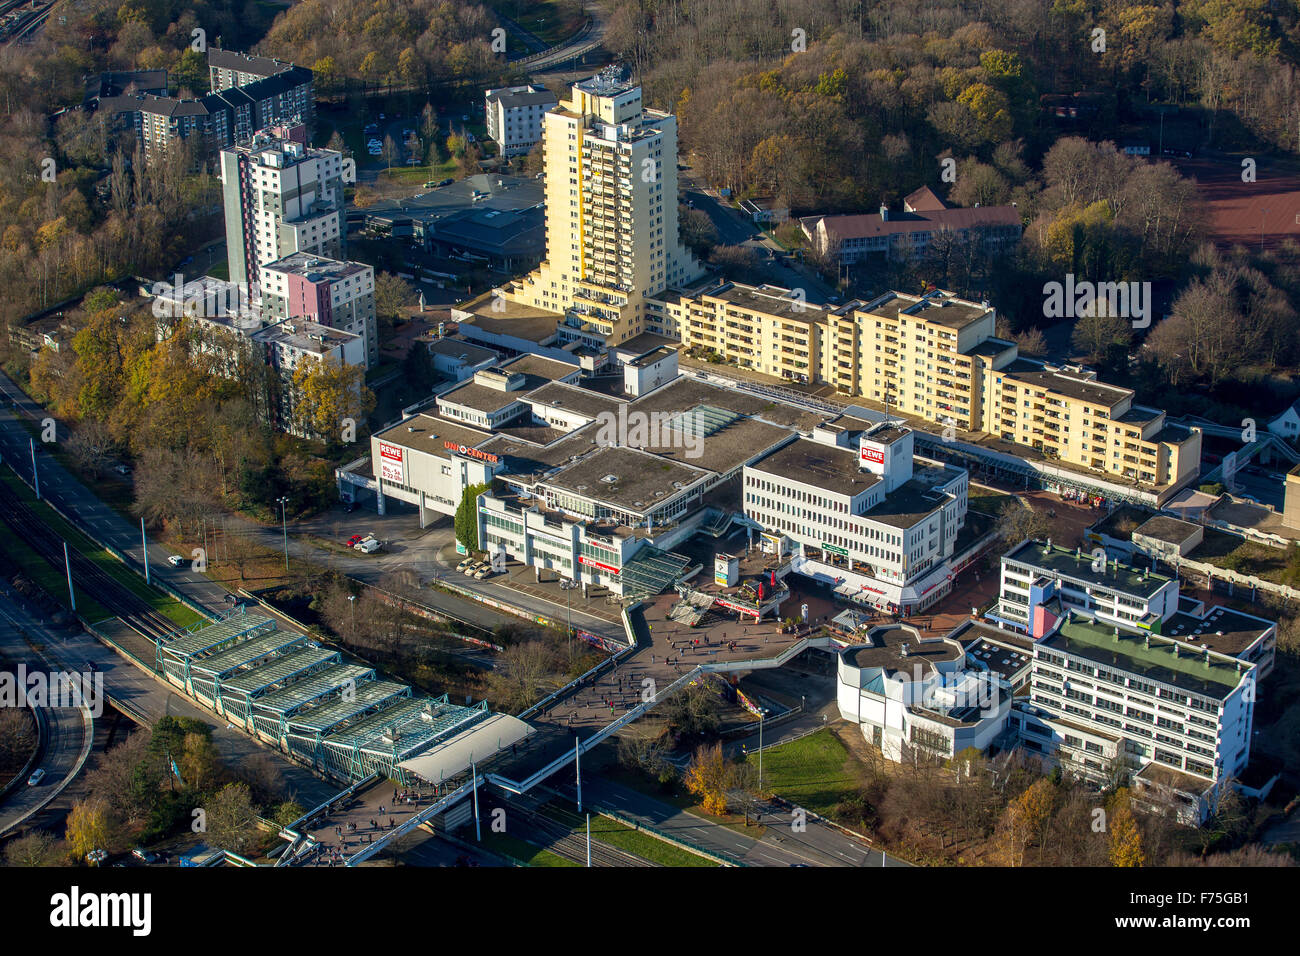 Neustadt an der RUB, residential towers, dormitories, student apartments Bochum, Ruhr area, North Rhine Westphalia Germany Stock Photo